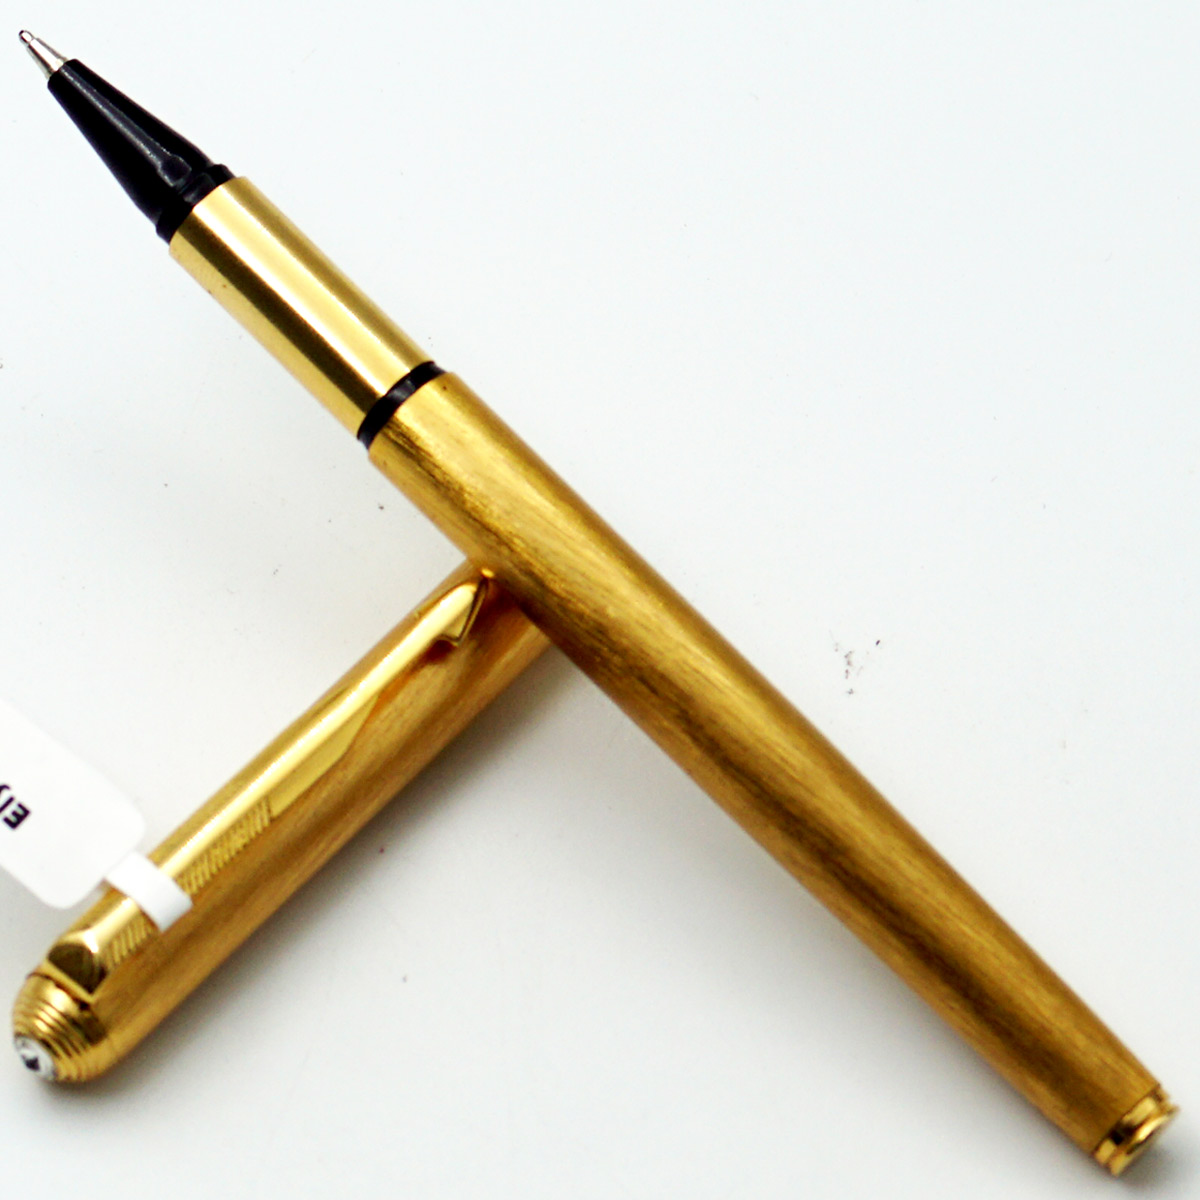 Elysee Shiny Golden Color Body With Golden Clip And Cap On Stone Medium Tip Roller Ball Pen SKU 24665